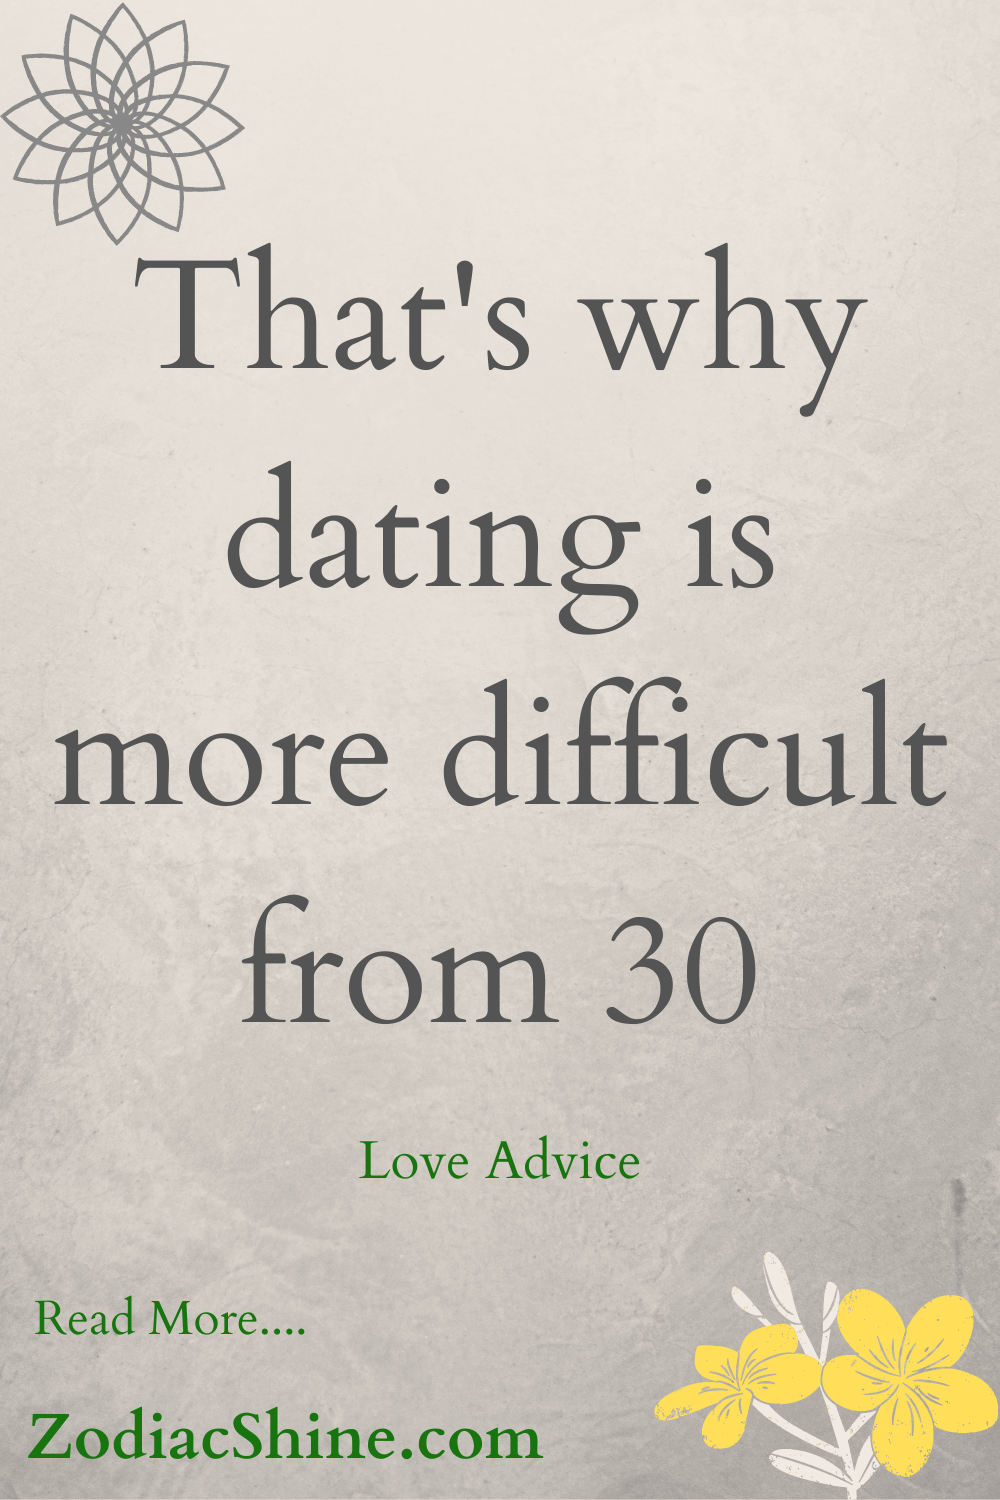 That's why dating is more difficult from 30